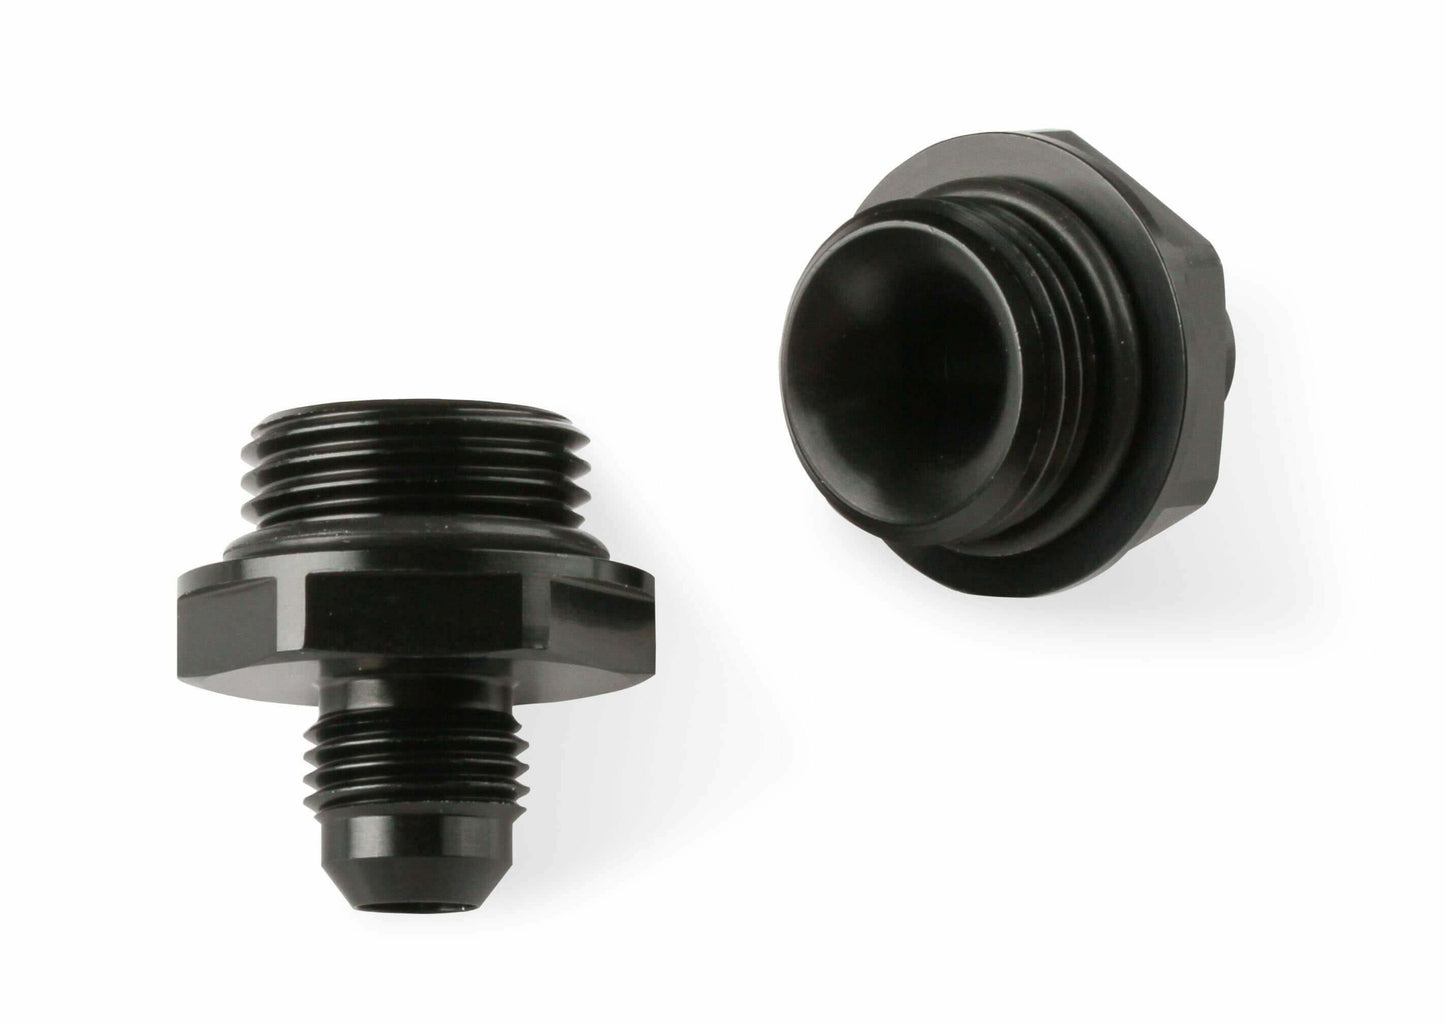 Earls Oil Cooler Adapters - AT585106ERL